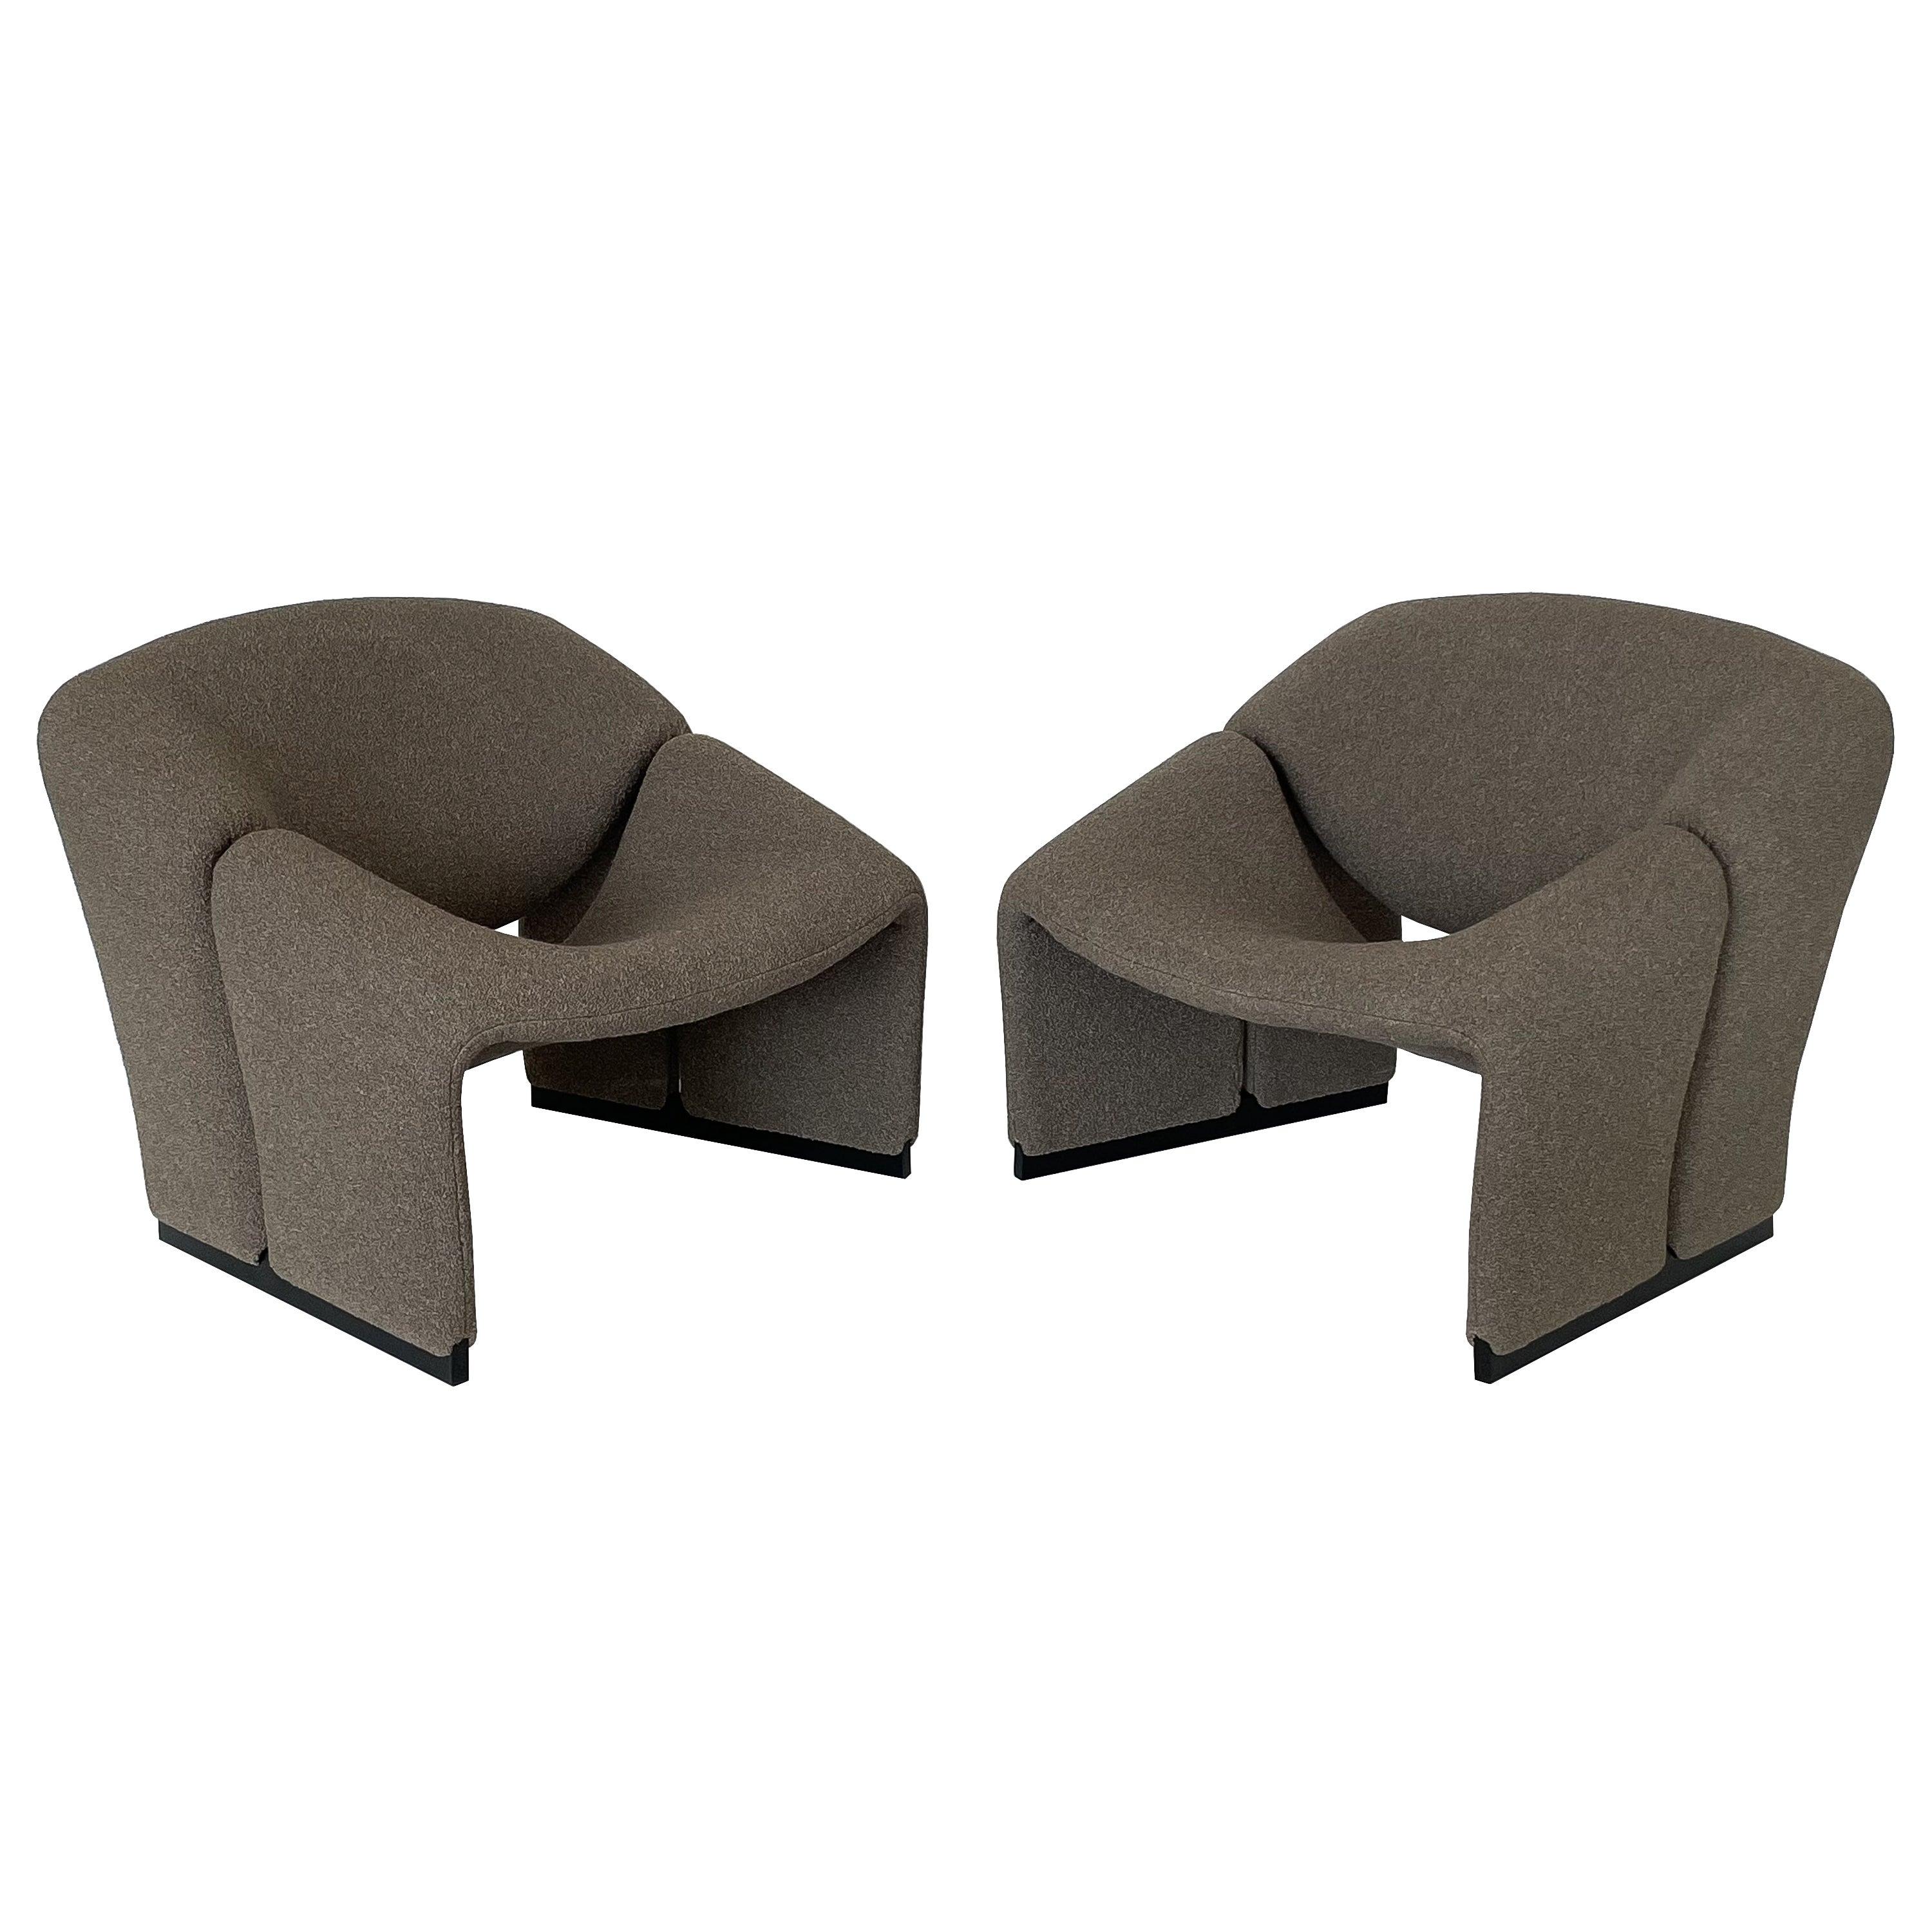 Pair of Pierre Paulin F580 1st Edition Groovy Lounge Chairs for Artifort